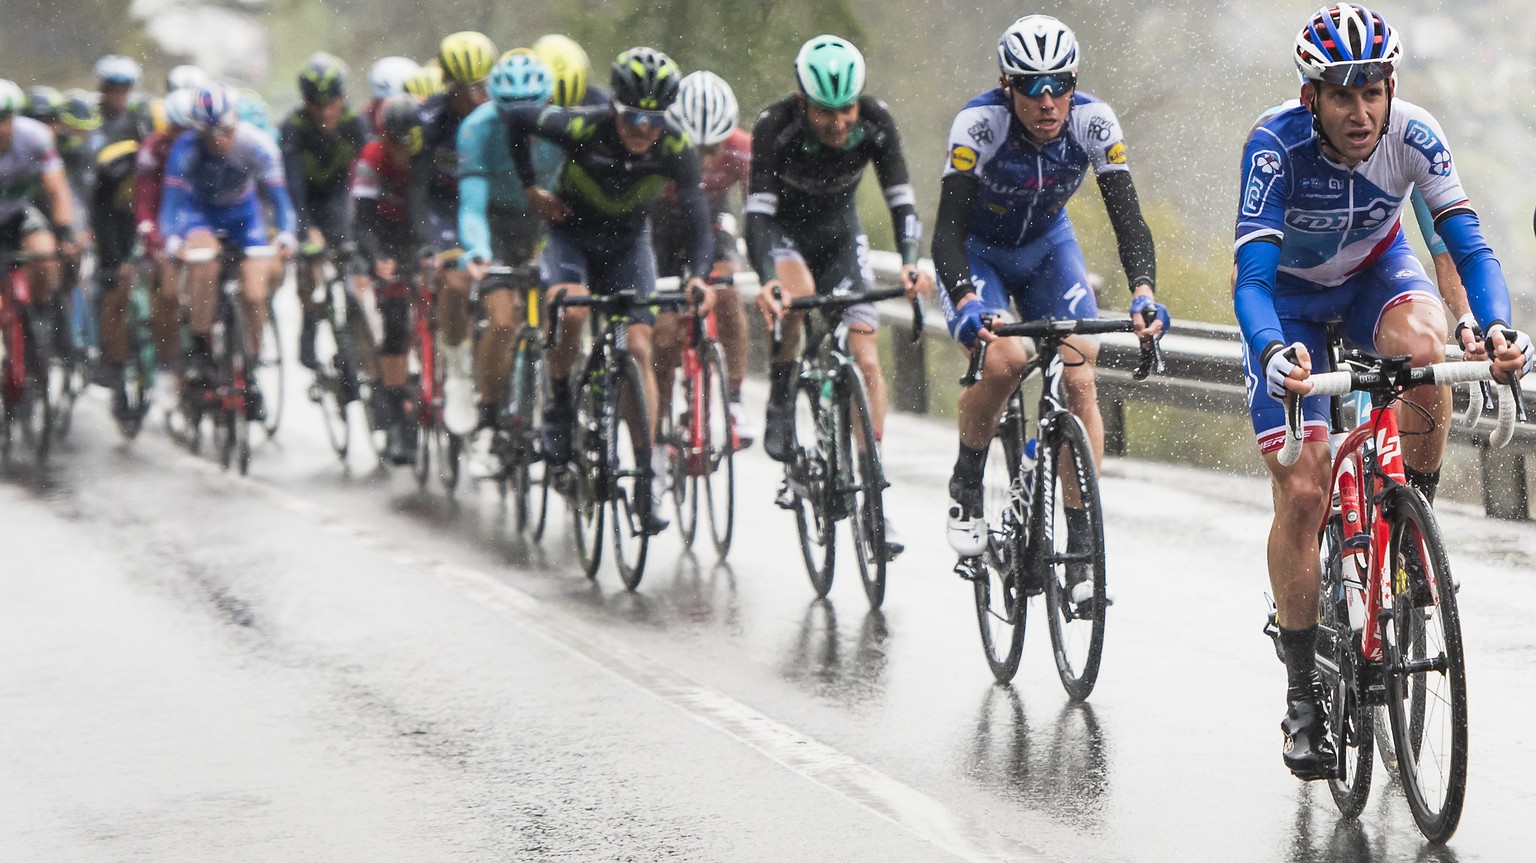 Sebastien Reichenbach from Switzerland of team FDJ, 4th from right, in action with the pack rides during the first stage, a 173.3 km race between Aigle and Champery at the 71th Tour de Romandie UCI Pr ...